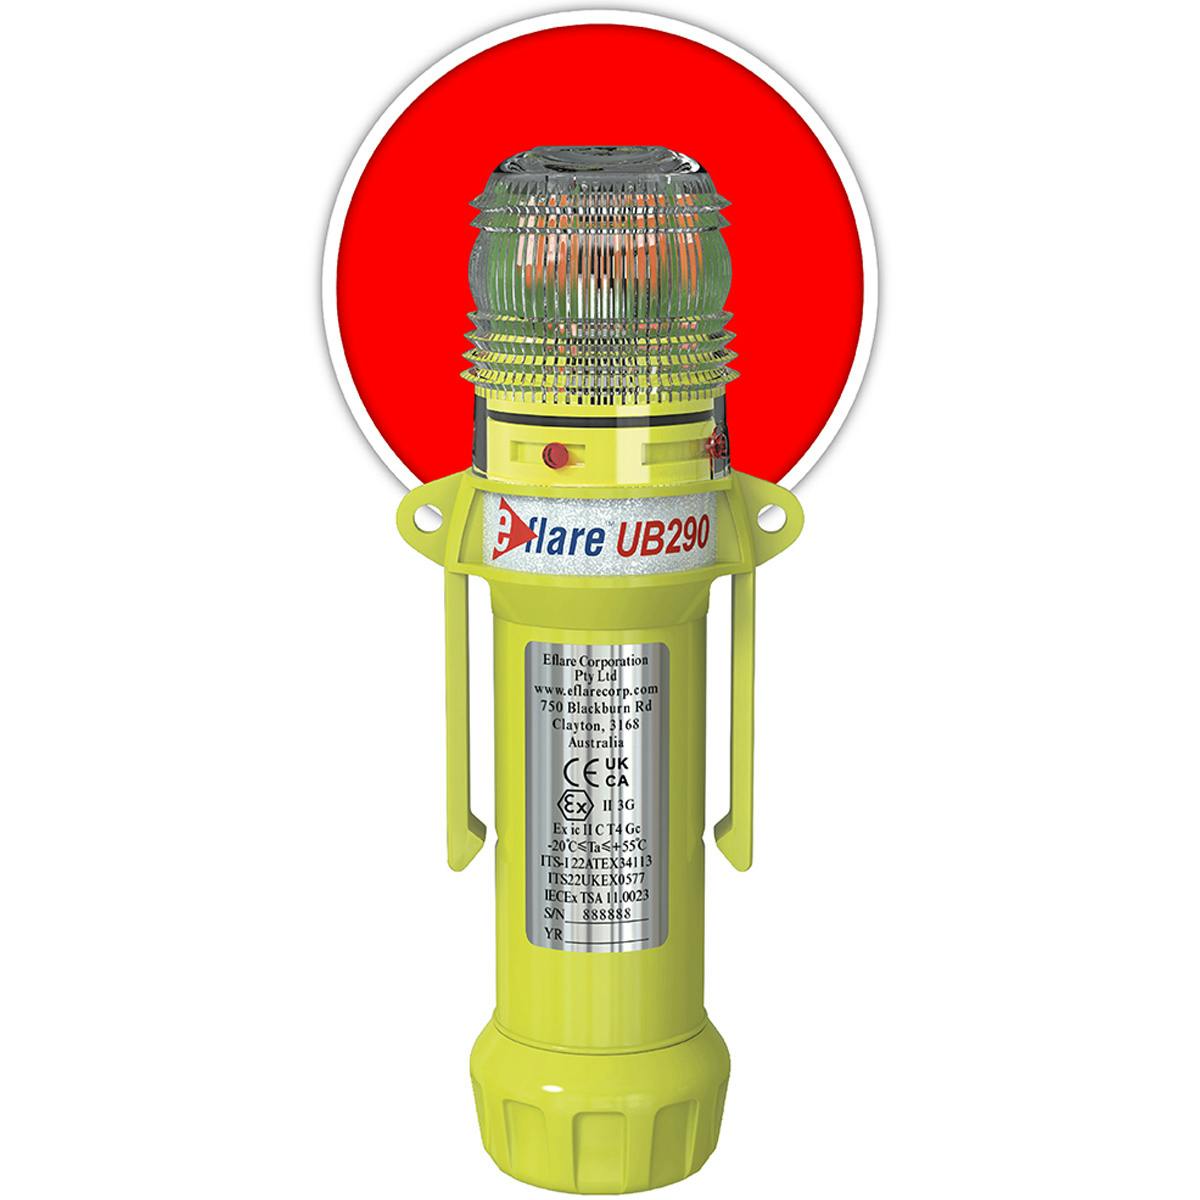 8" Safety & Emergency Beacon - Flashing / Steady-On Red, Red (939-UB290-R) - 8_0